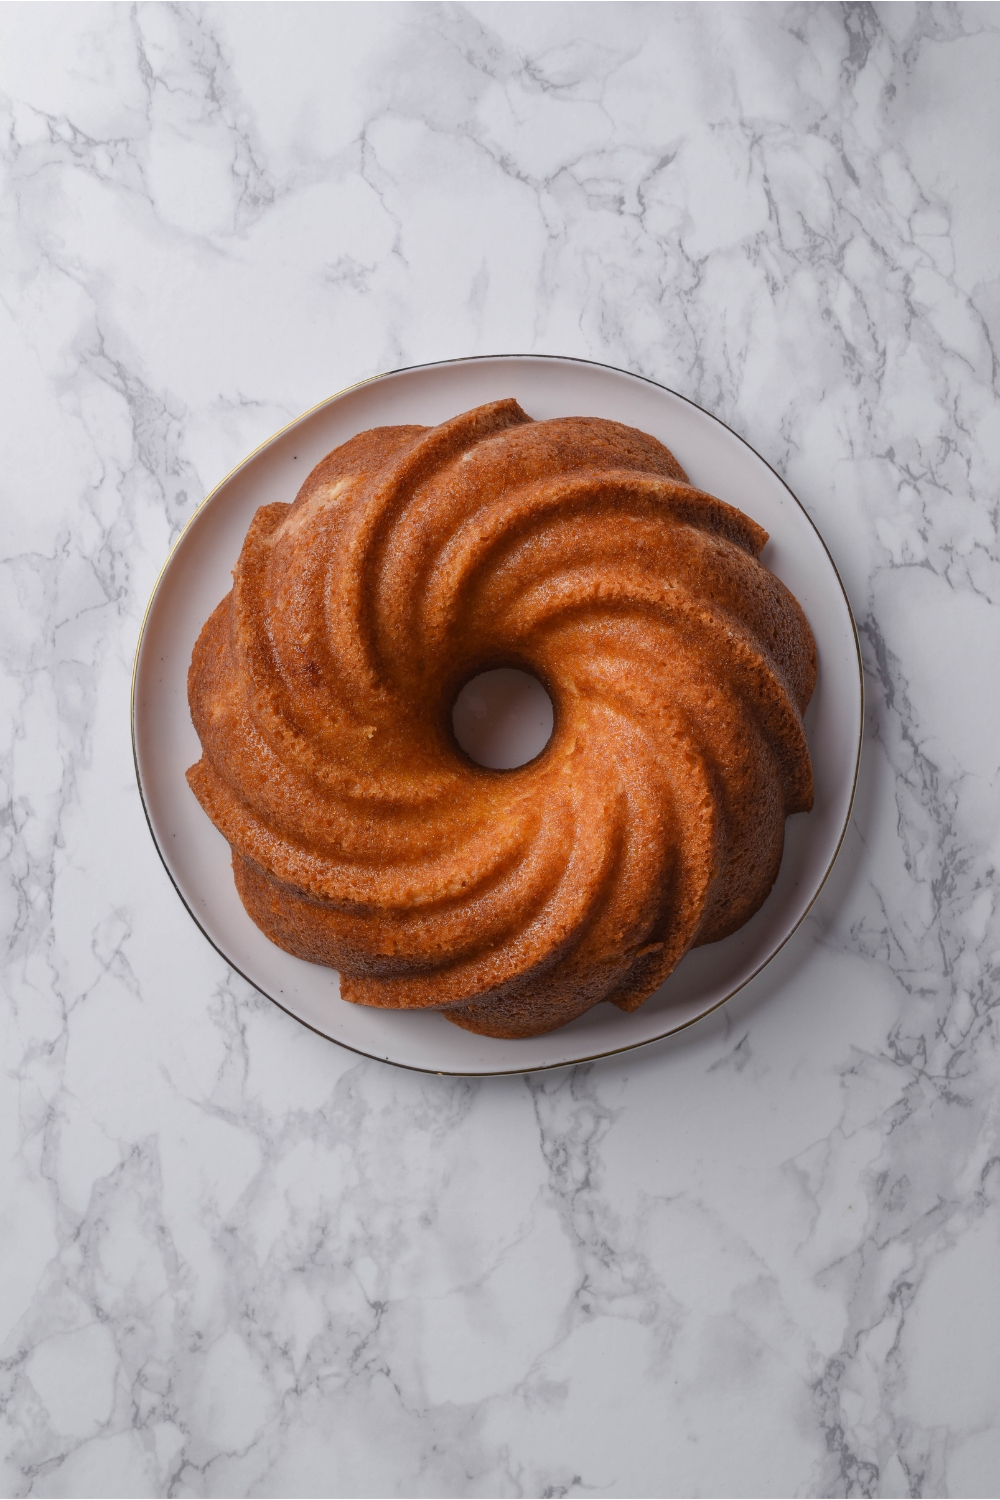 A baked and cooled buttermilk pound cake is on a white serving plate.